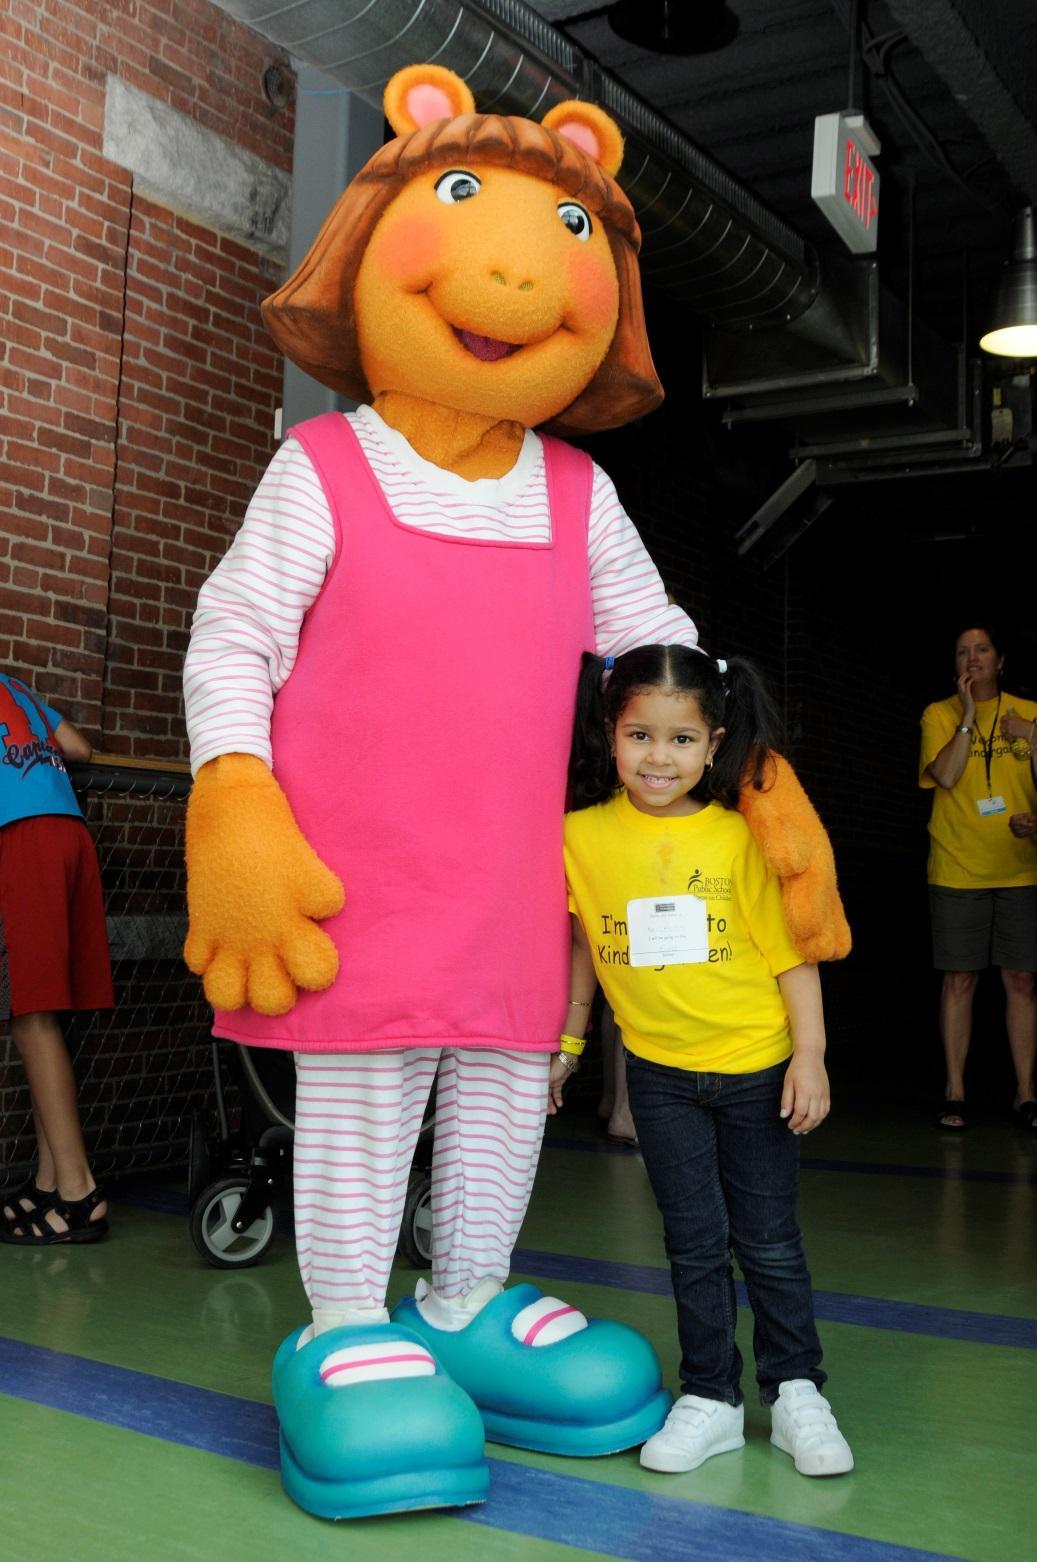 An incoming kindergartener meets D.W. from the popular Arthur series at the Countdown to Kindergarten Celebration at Boston Children’s Museum.